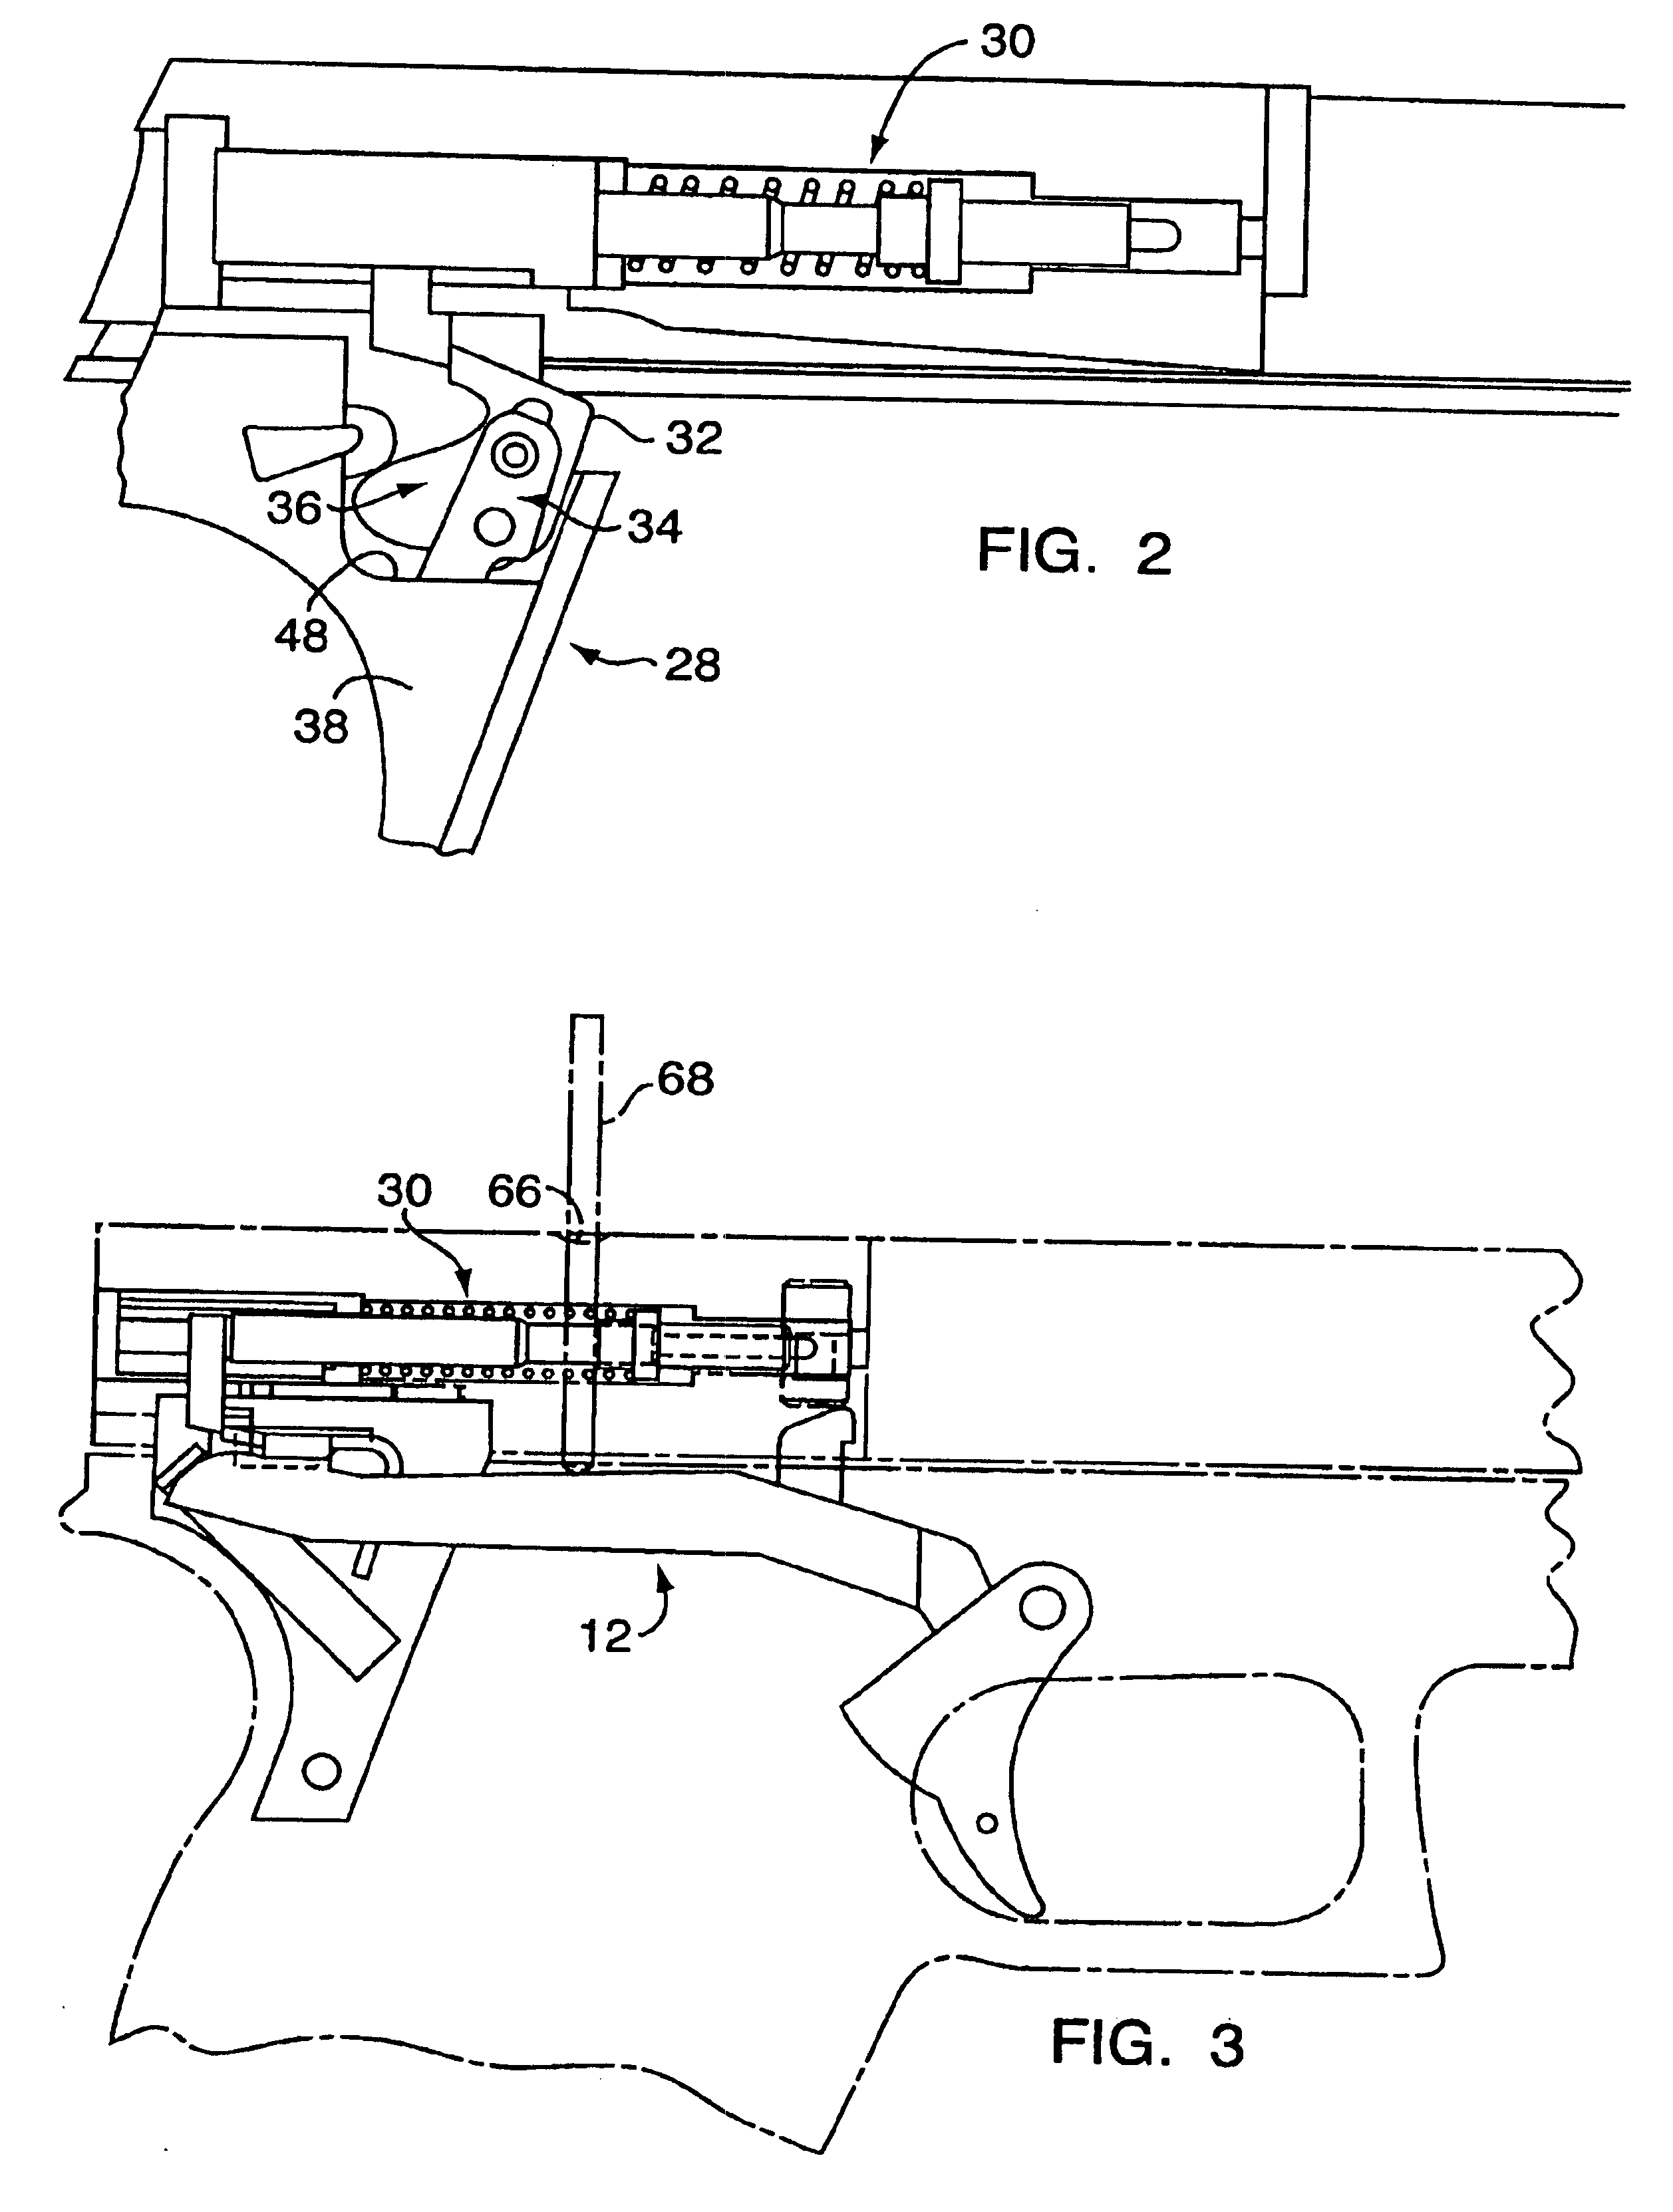 Apparatus and method for removing the slide of a semi-automatic pistol